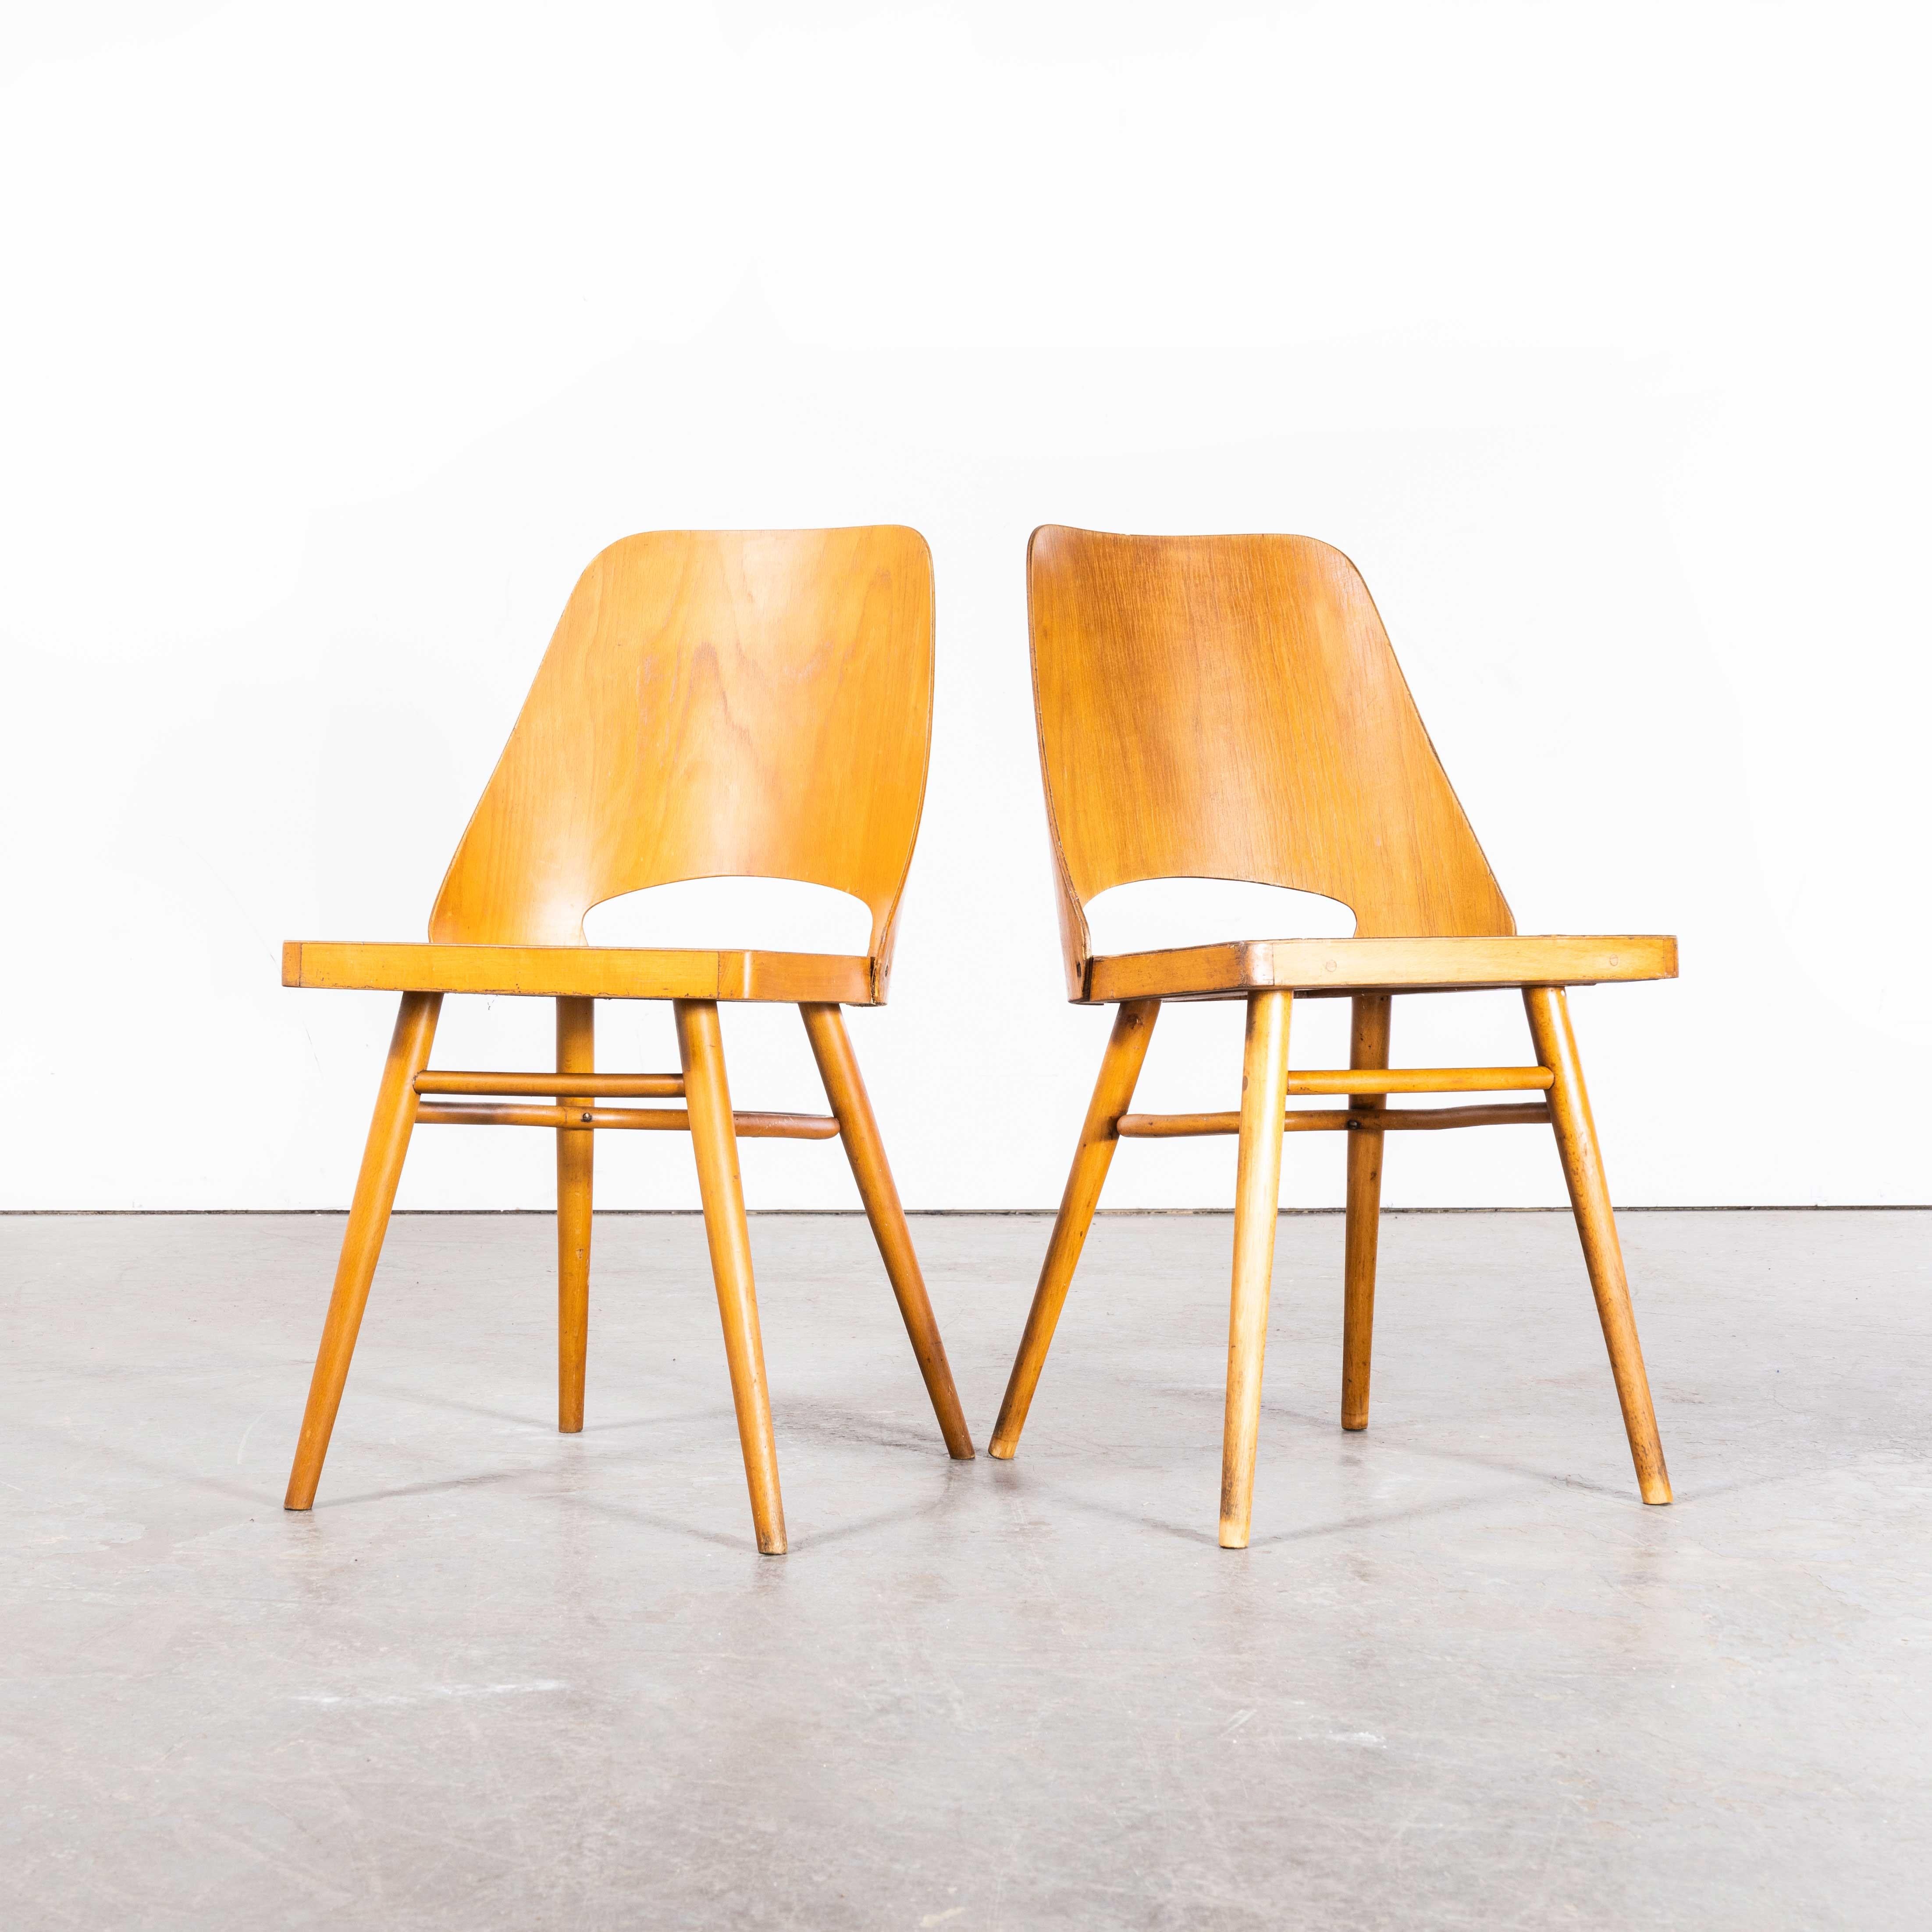 Czech 1950's Honey Beech Dining Chairs By Radomir Hoffman For Ton - Pair For Sale